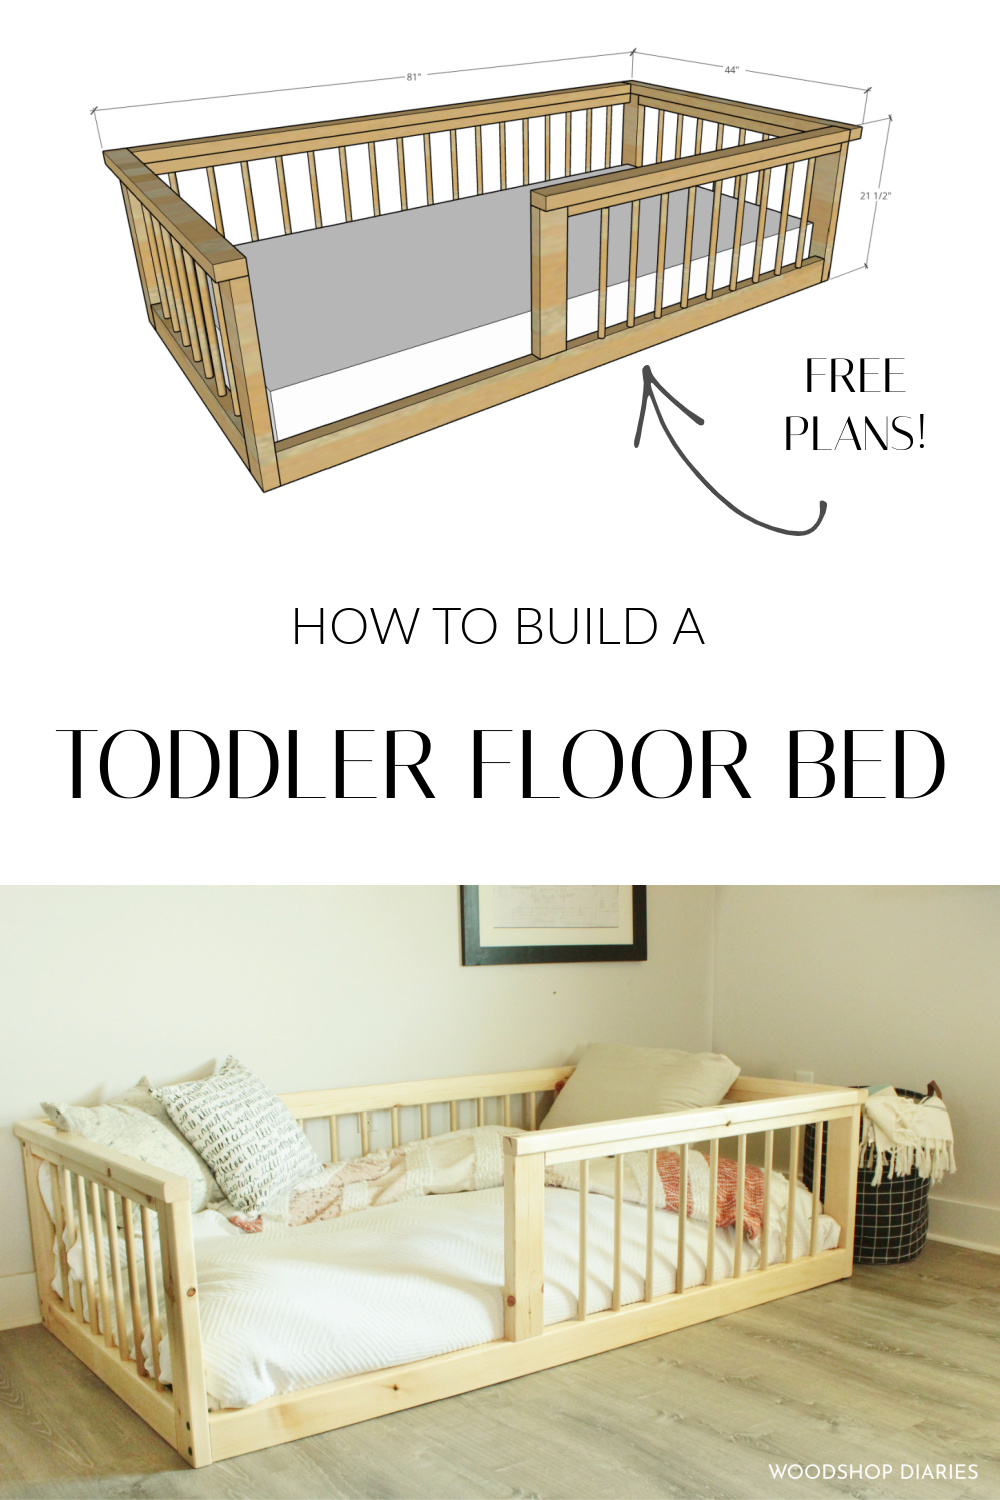 Diy Toddler Floor Bed Made From 2x4s, How To Build A Toddler Bed Frame